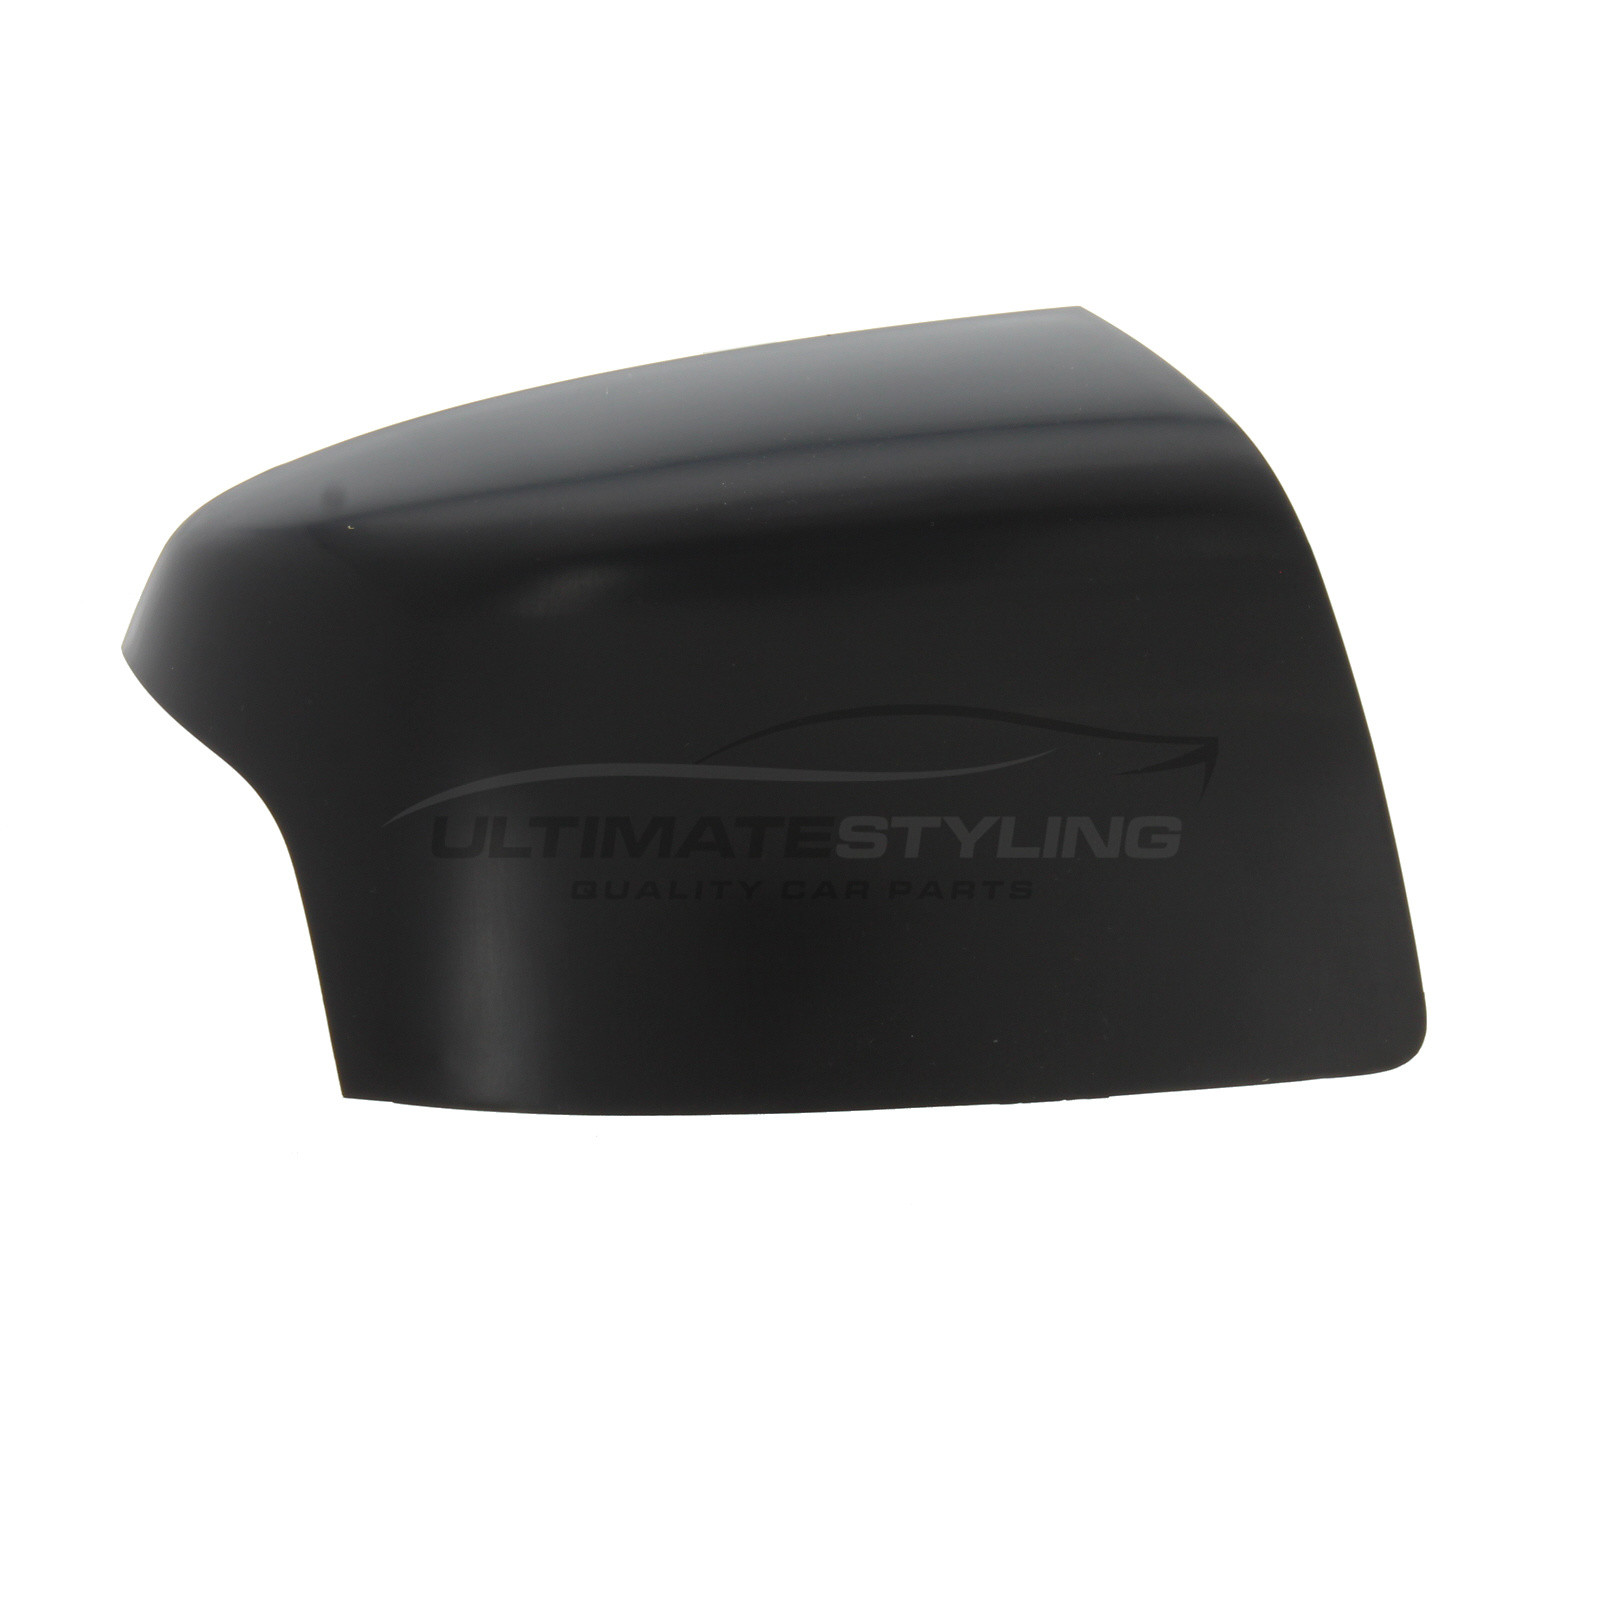 Ford C-MAX 2007-2011, Ford Focus 2003-2012 Wing Mirror Cover Cap Casing Black, Suitable for Painting Drivers Side (RH) to suit Mirror with Indicator